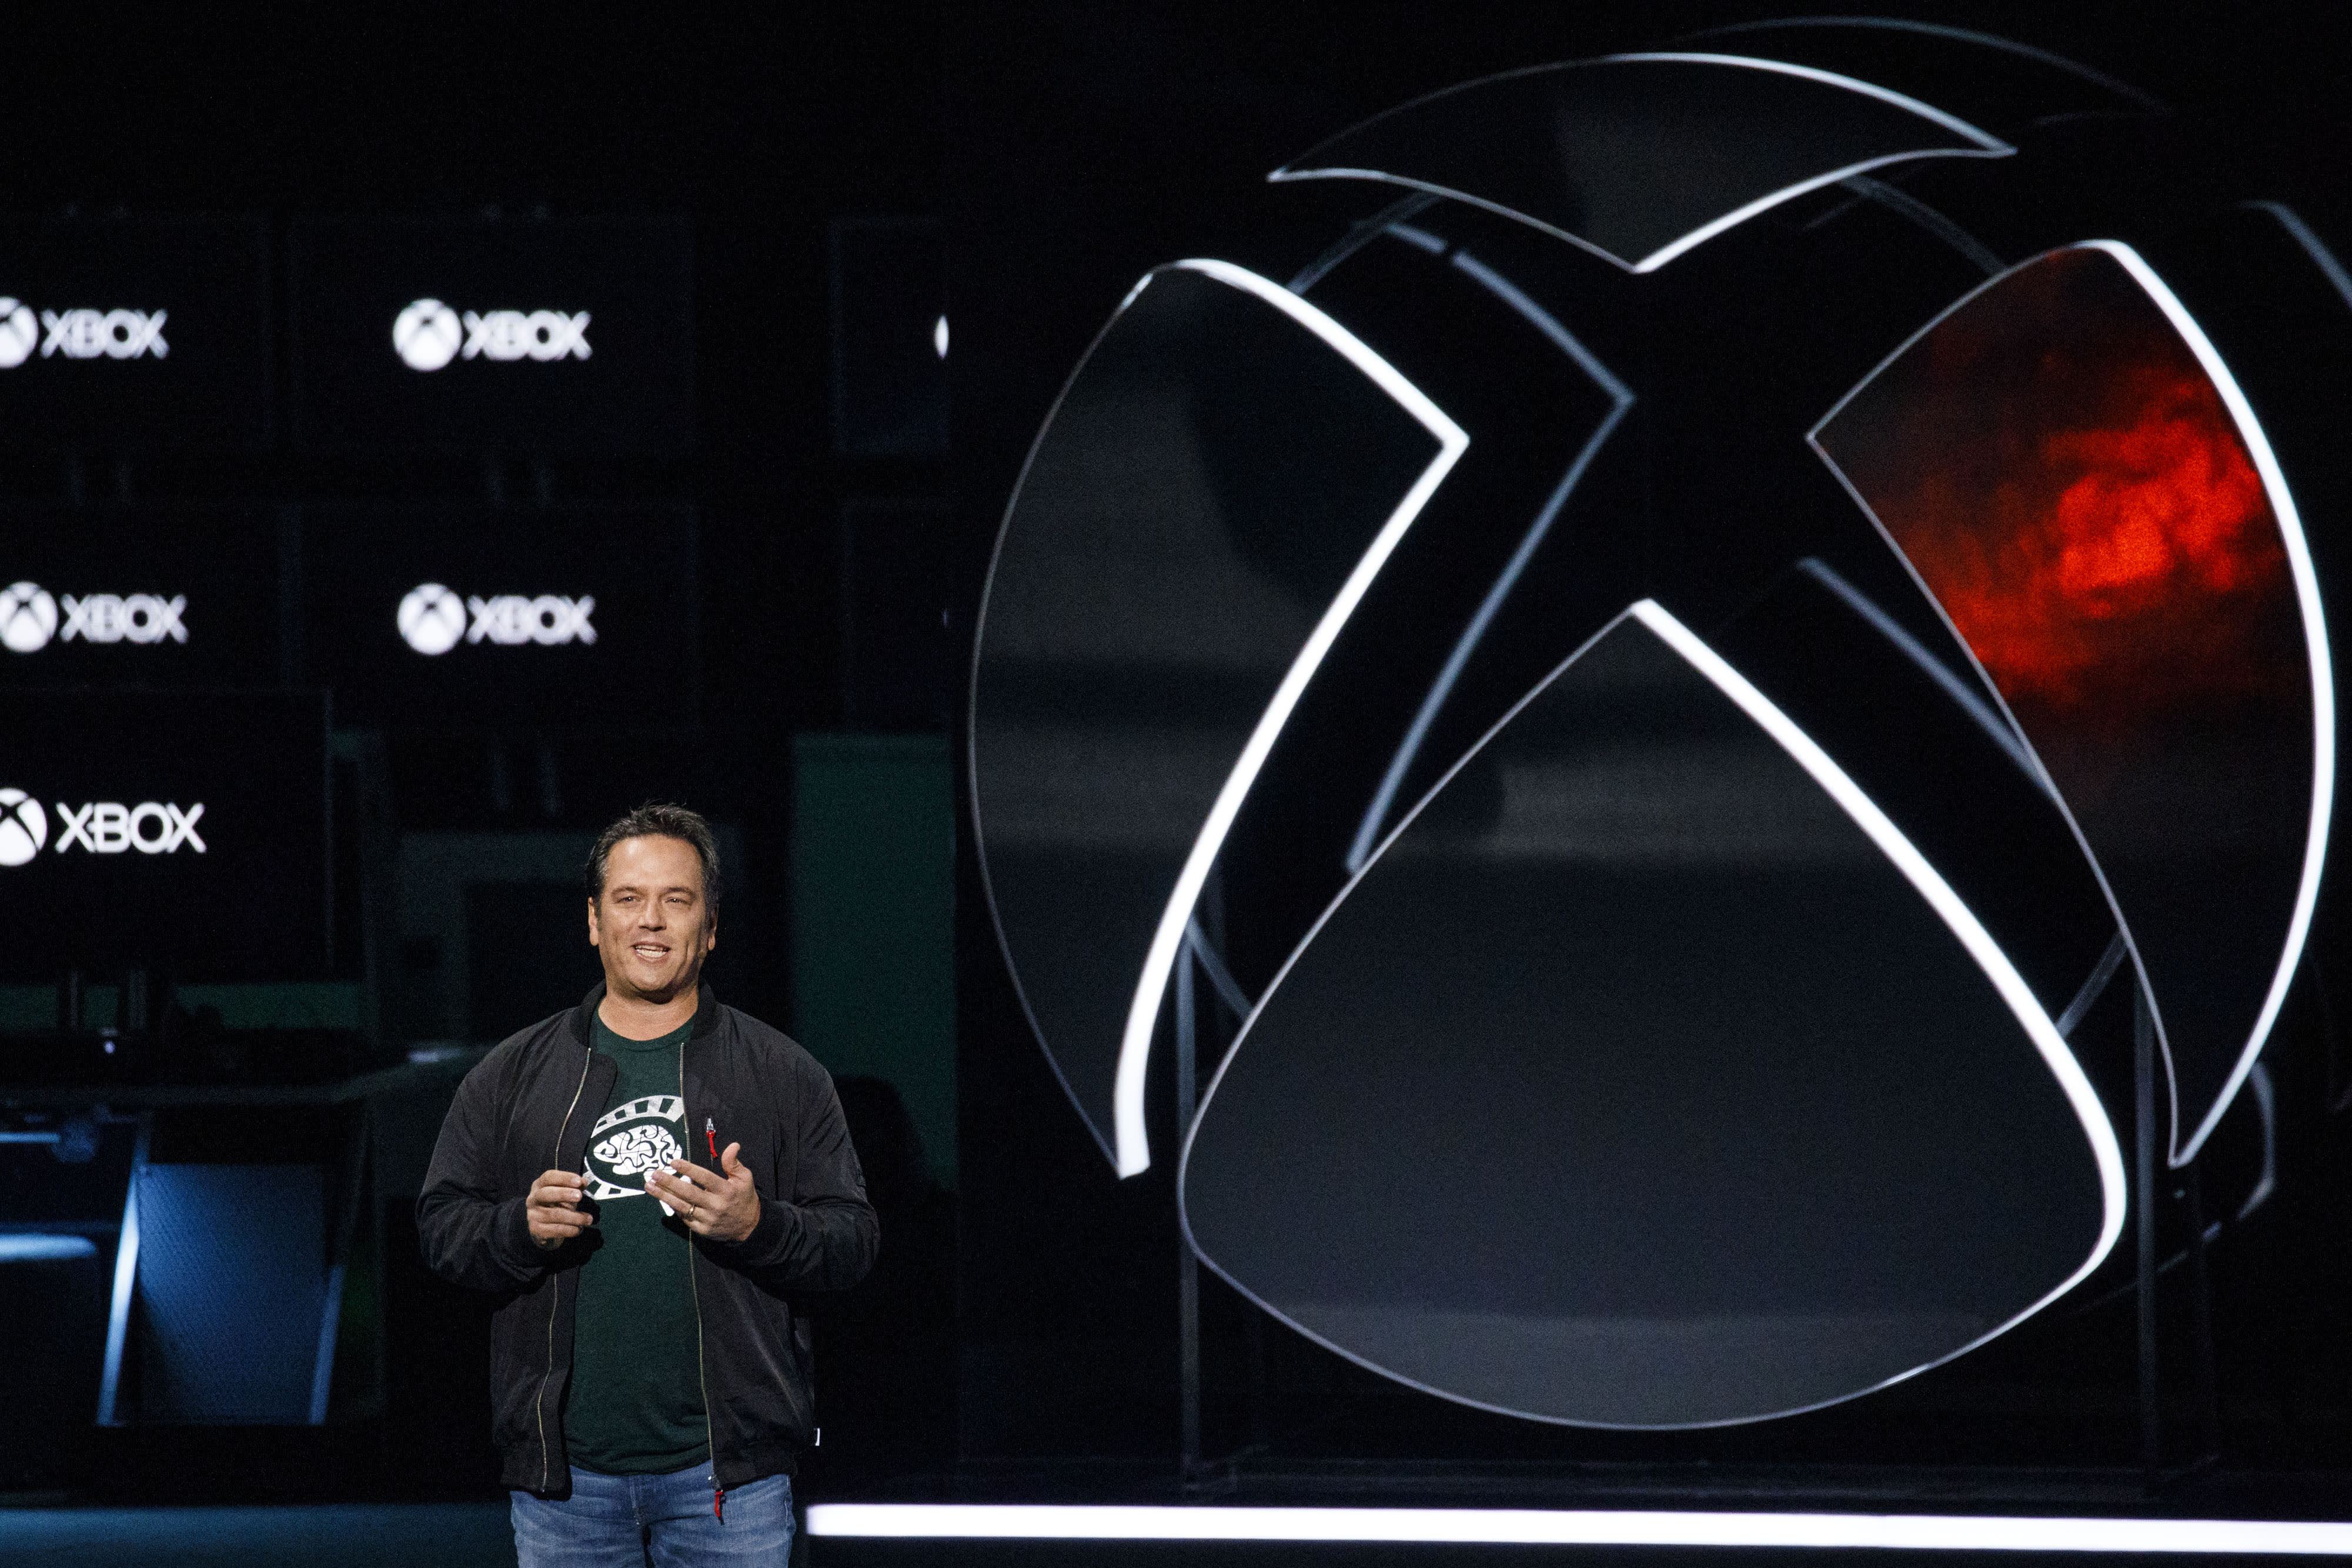 Xbox Game Pass will go up in price again, Phil Spencer confirms